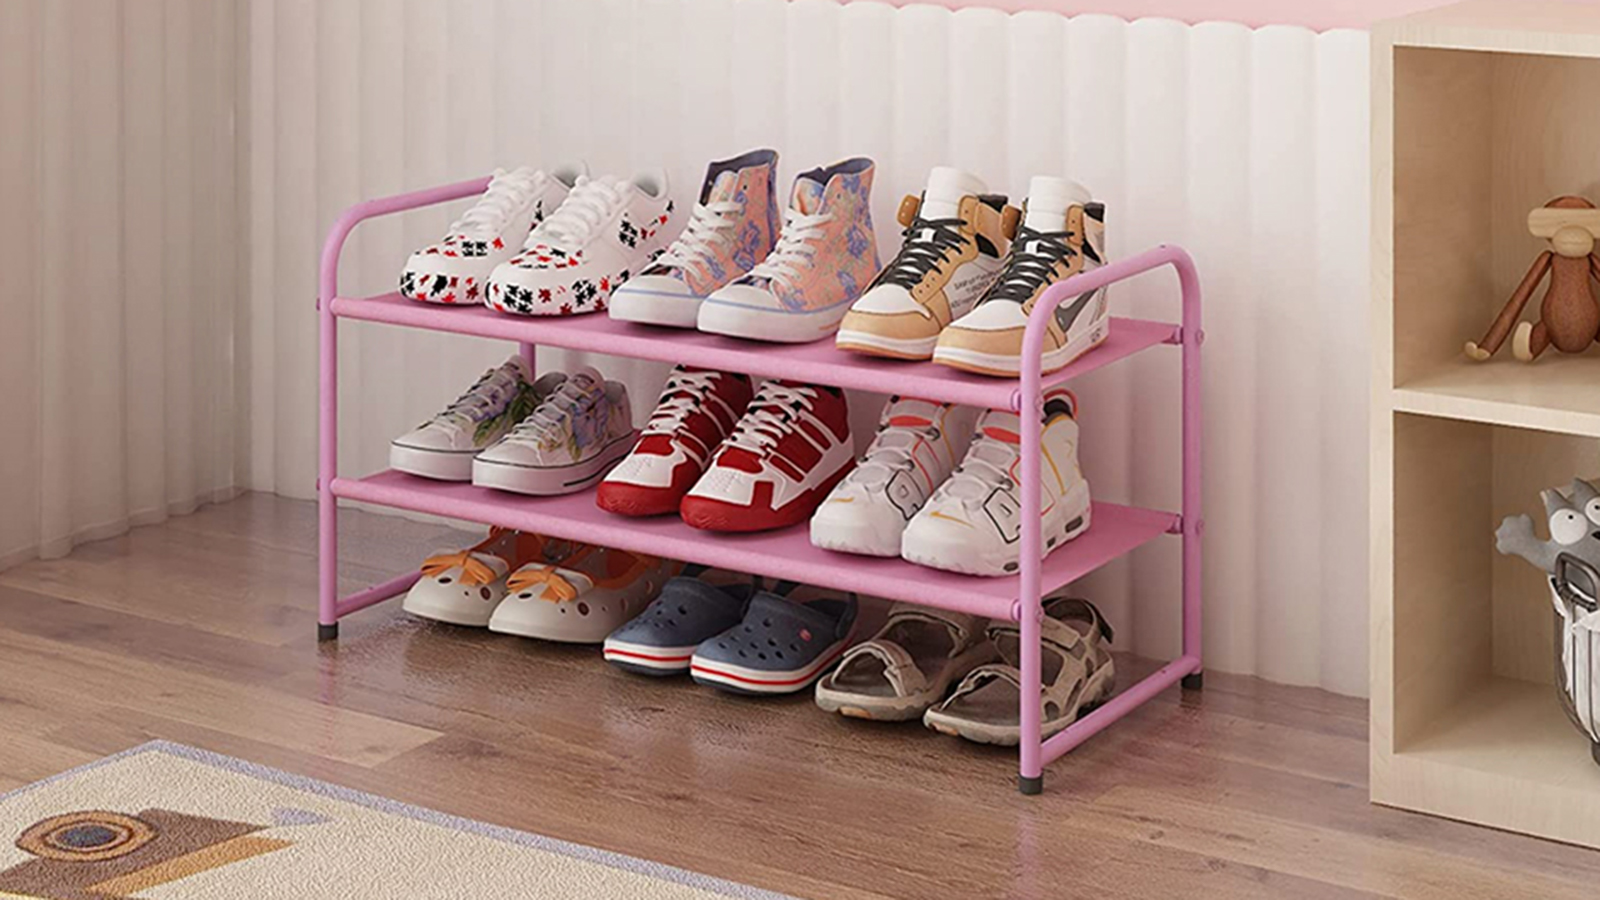 12 Pairs Shoes Storage Organizer Holder Container Under Bed Closet Box Bag US